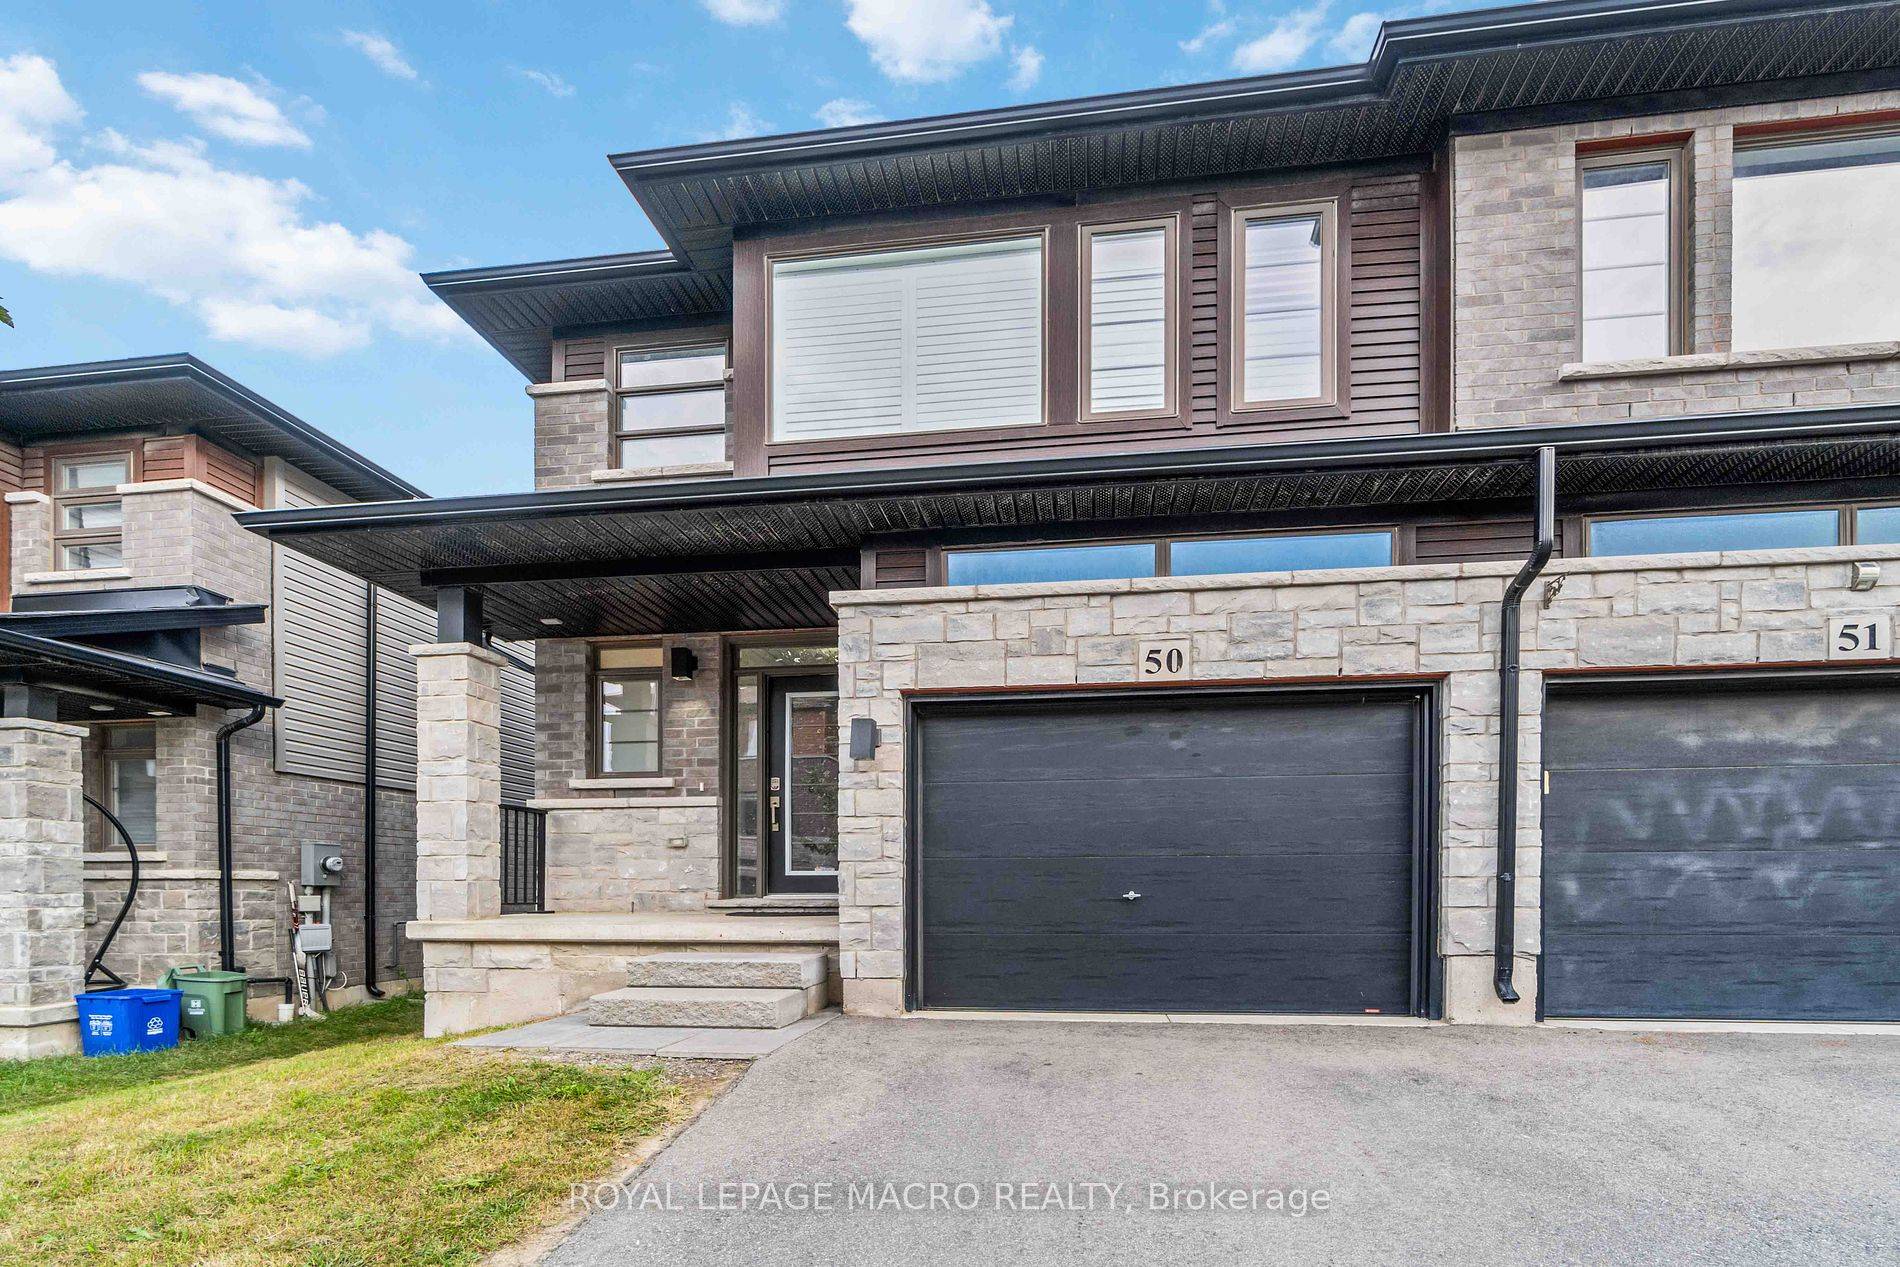 This beautiful Spacious freehold End Unit Town Home offers 1611 sq feet, Was Built By Award Winning Builder Losani Homes In 2019 Is The Perfect Combination Of Modern Elegance And ...